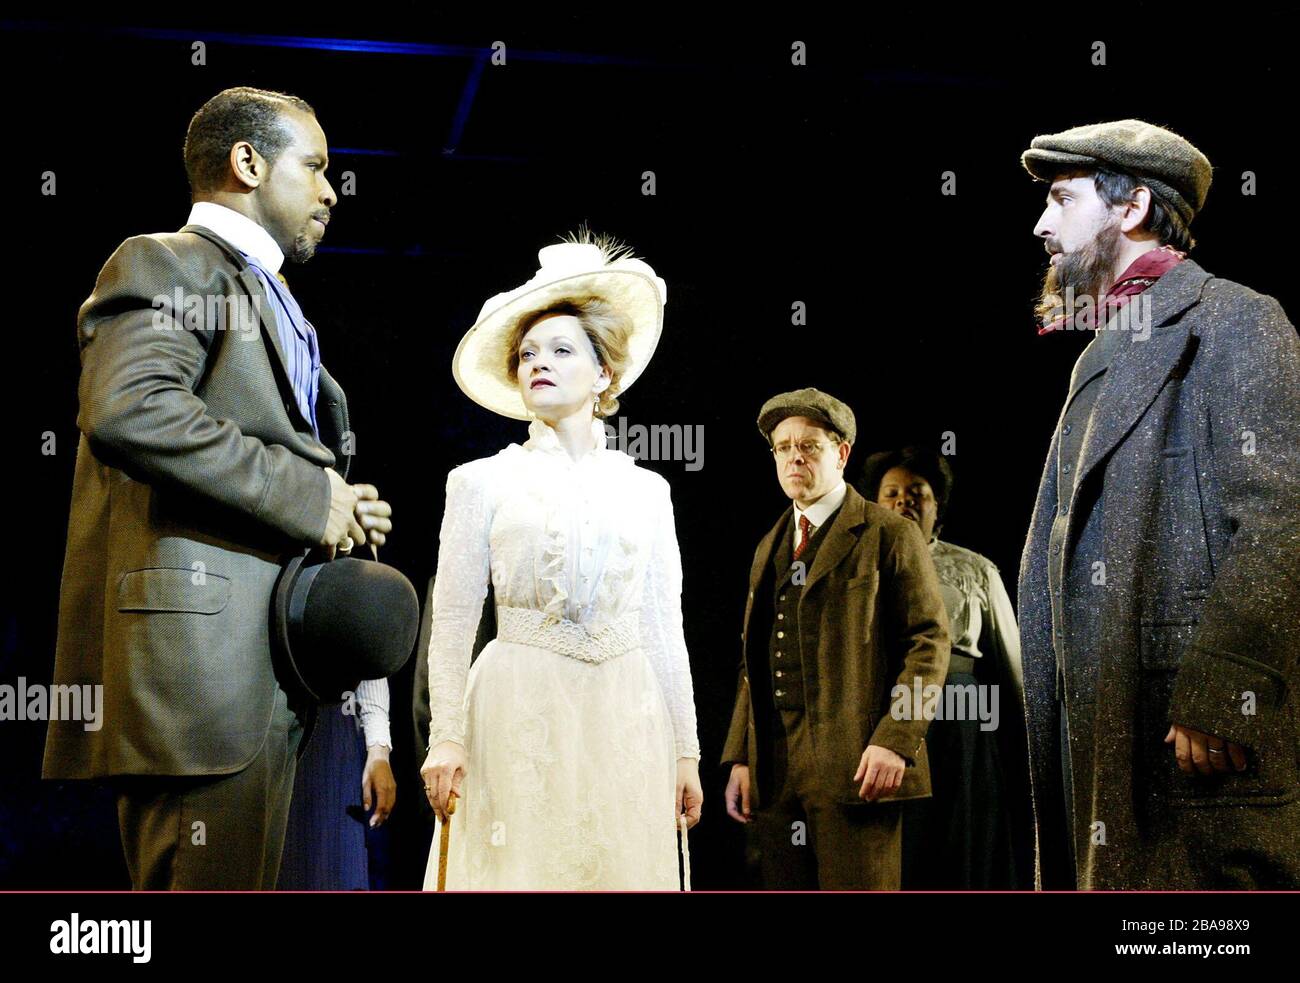 RAGTIME The Musical  based on the book by E.L. Doctorow  book: Terrence McNally  music: Stephen Flaherty   lyrics: Lynn Ahrens  design: Robert Jones  lighting: Howard Harrison  director: Stafford Arima  l-r: Kevyn Morrow (Coalhouse Walker, Jnr), Maria Friedman (Mother), Matthew White (Younger Brother), Graham Bickley (Tateh) Piccadilly Theatre, London W1  19/03/2003 Stock Photo